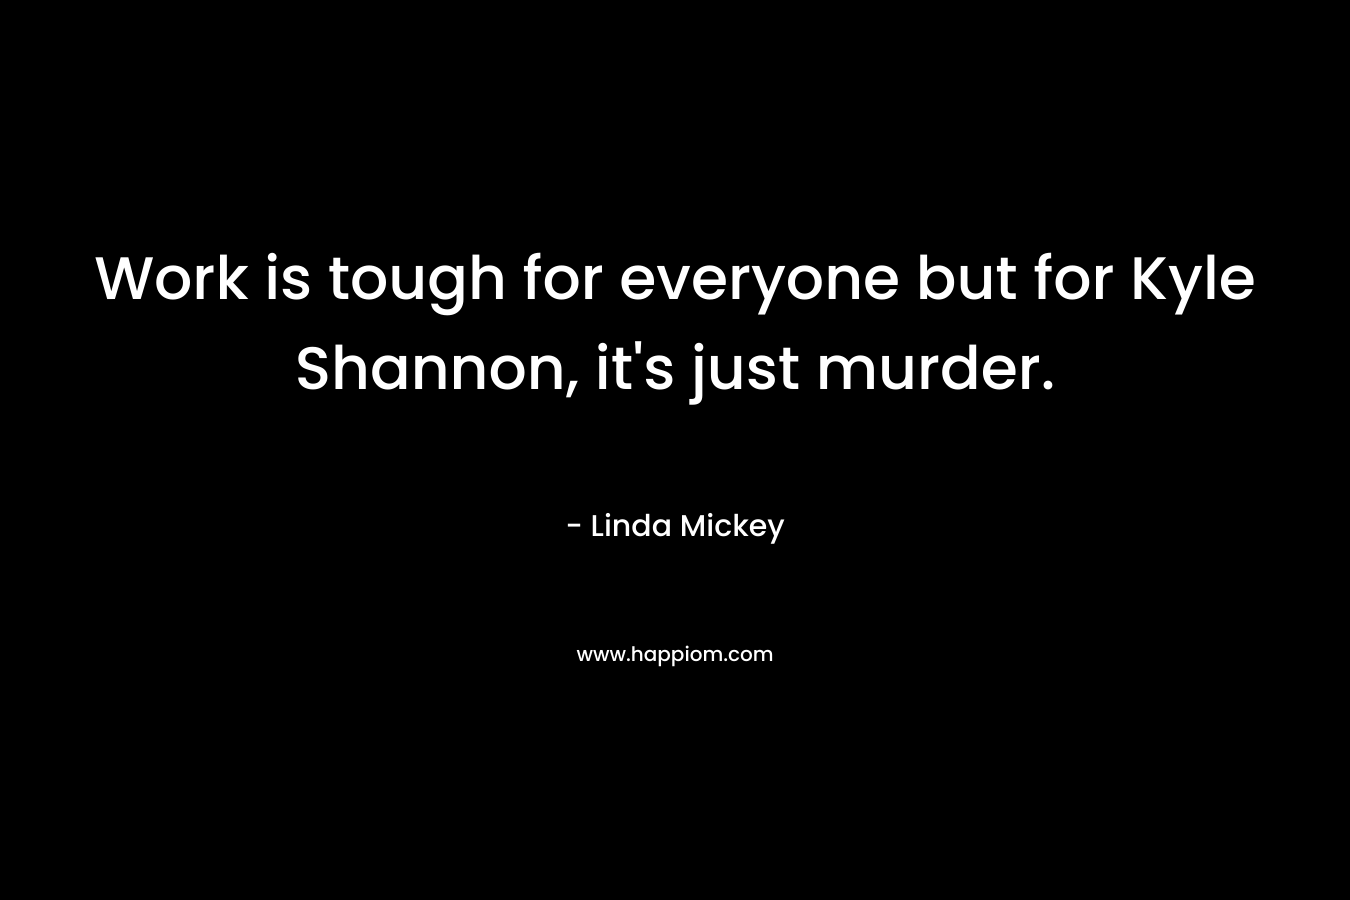 Work is tough for everyone but for Kyle Shannon, it’s just murder. – Linda Mickey